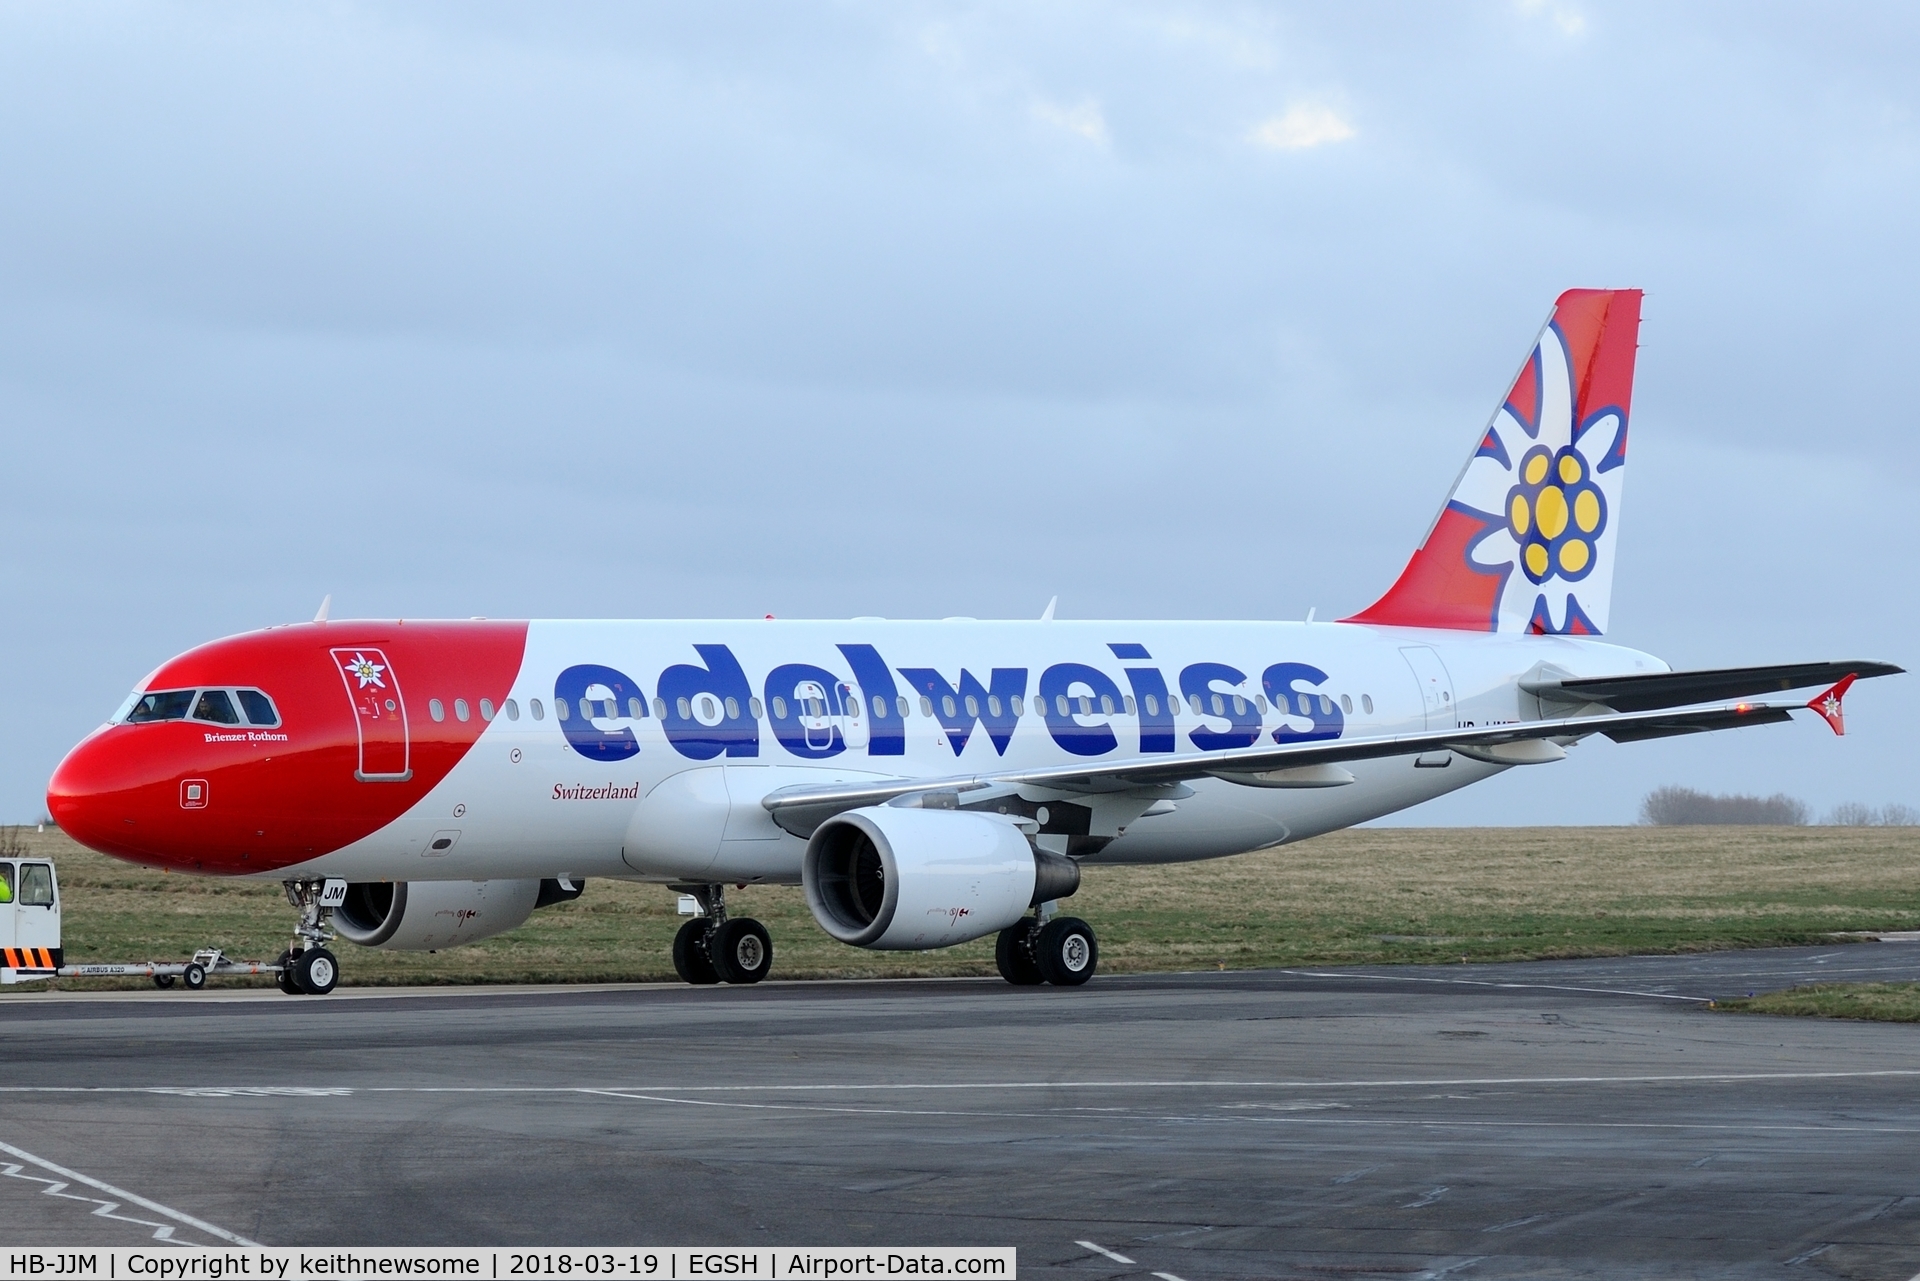 HB-JJM, 2005 Airbus A320-214 C/N 2627, Removed from spray shop with Edelweiss colour scheme.